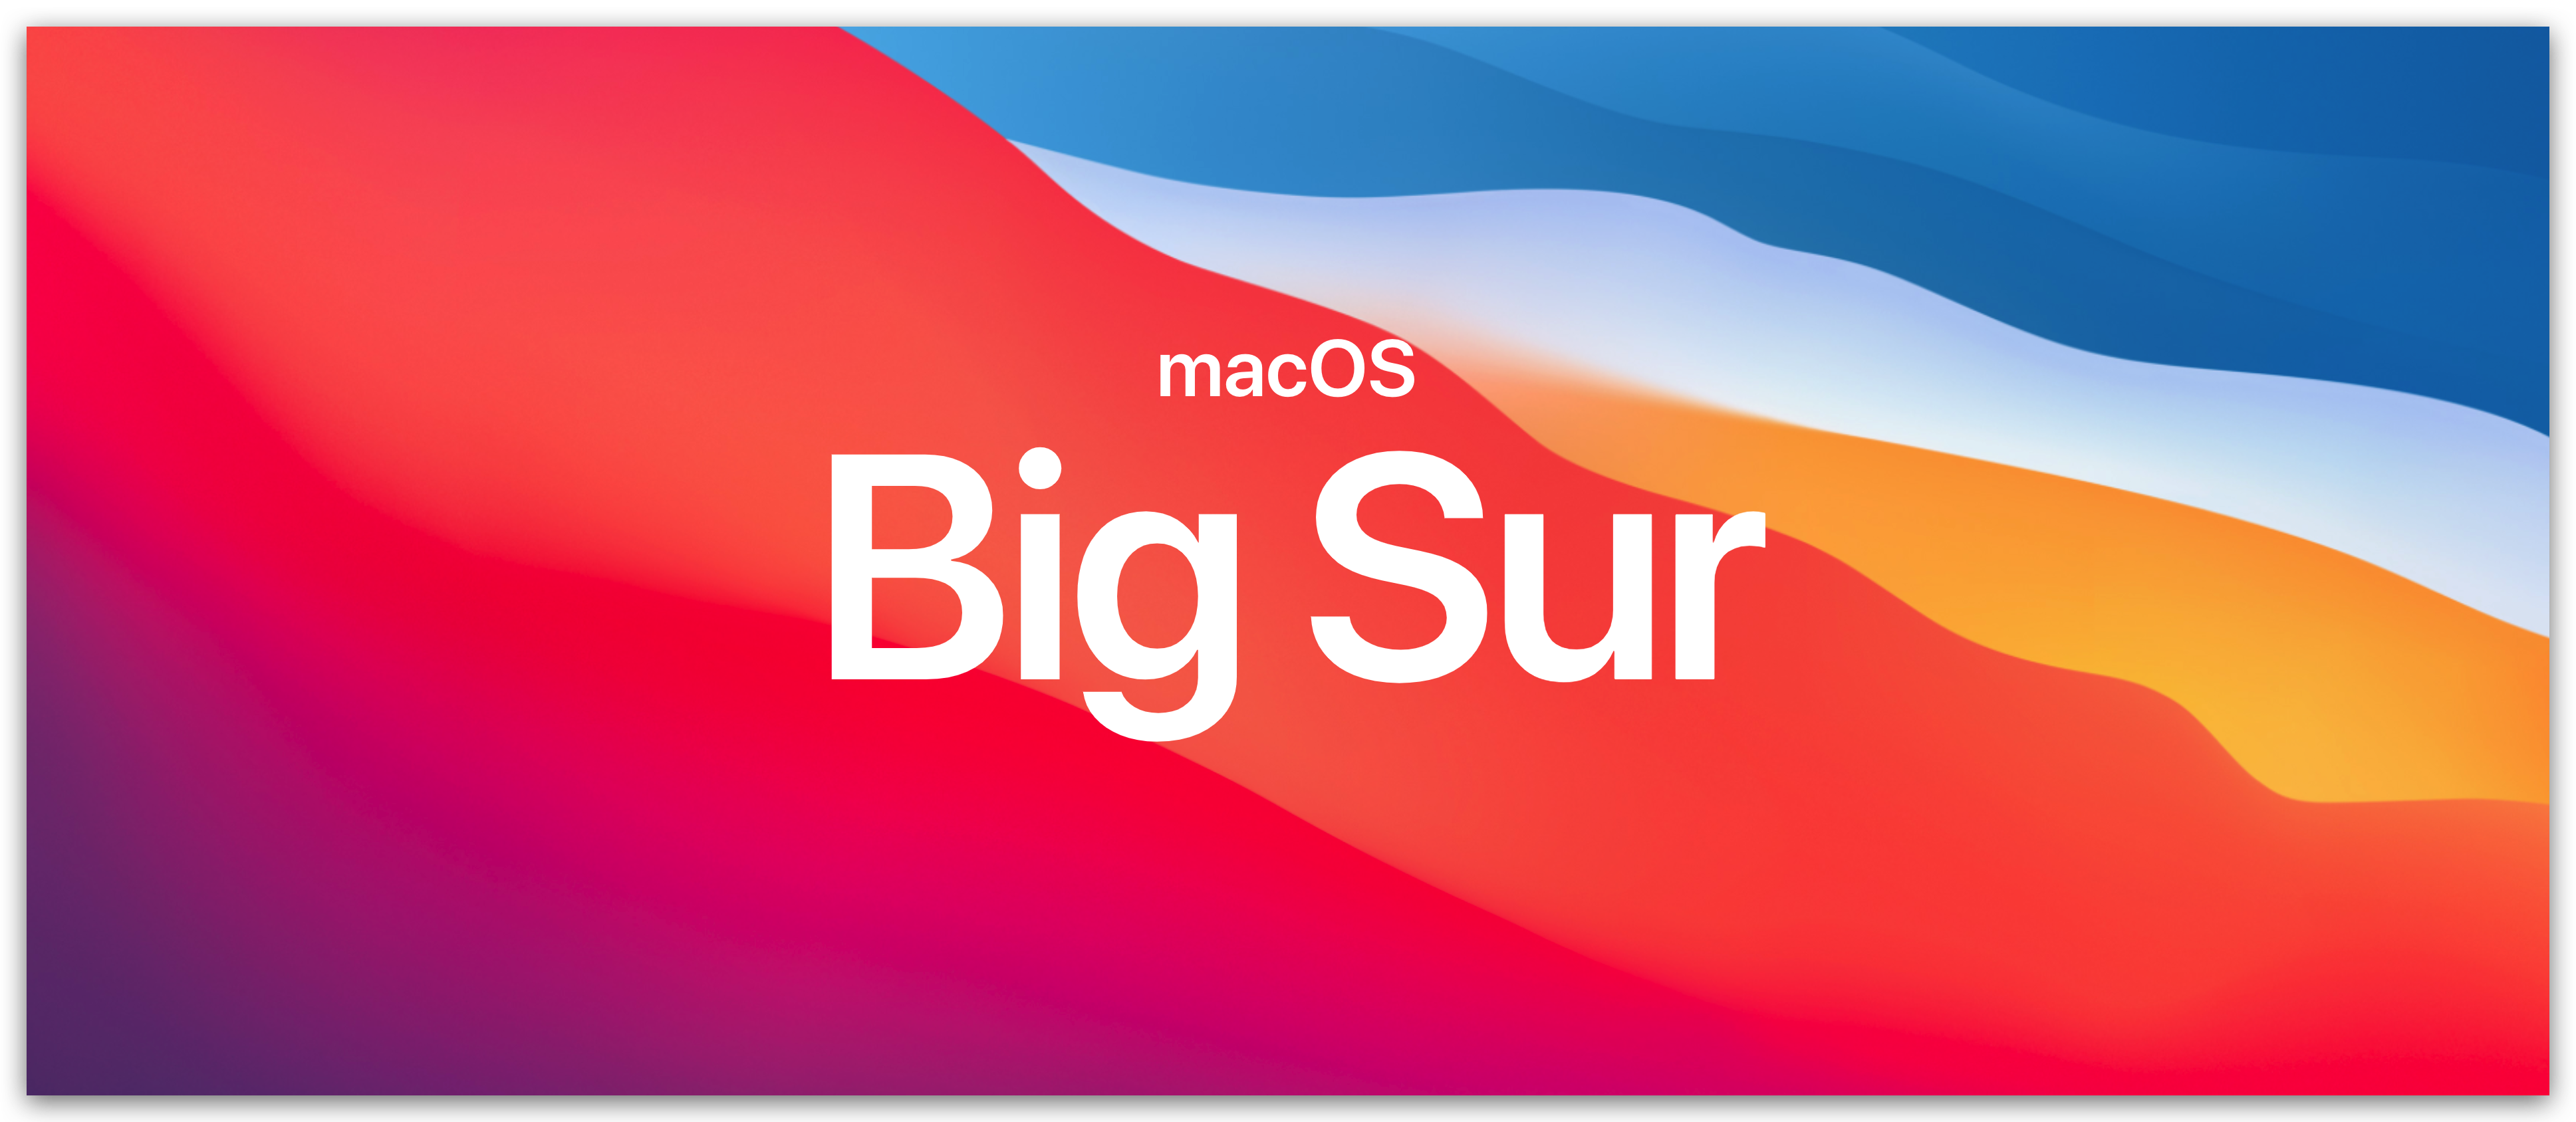 macOS Big Sur 11.0.1 20B29 Installer for CLOVER 5126 and OpenCore 0.6.3 and PE三EFI分区原版镜像